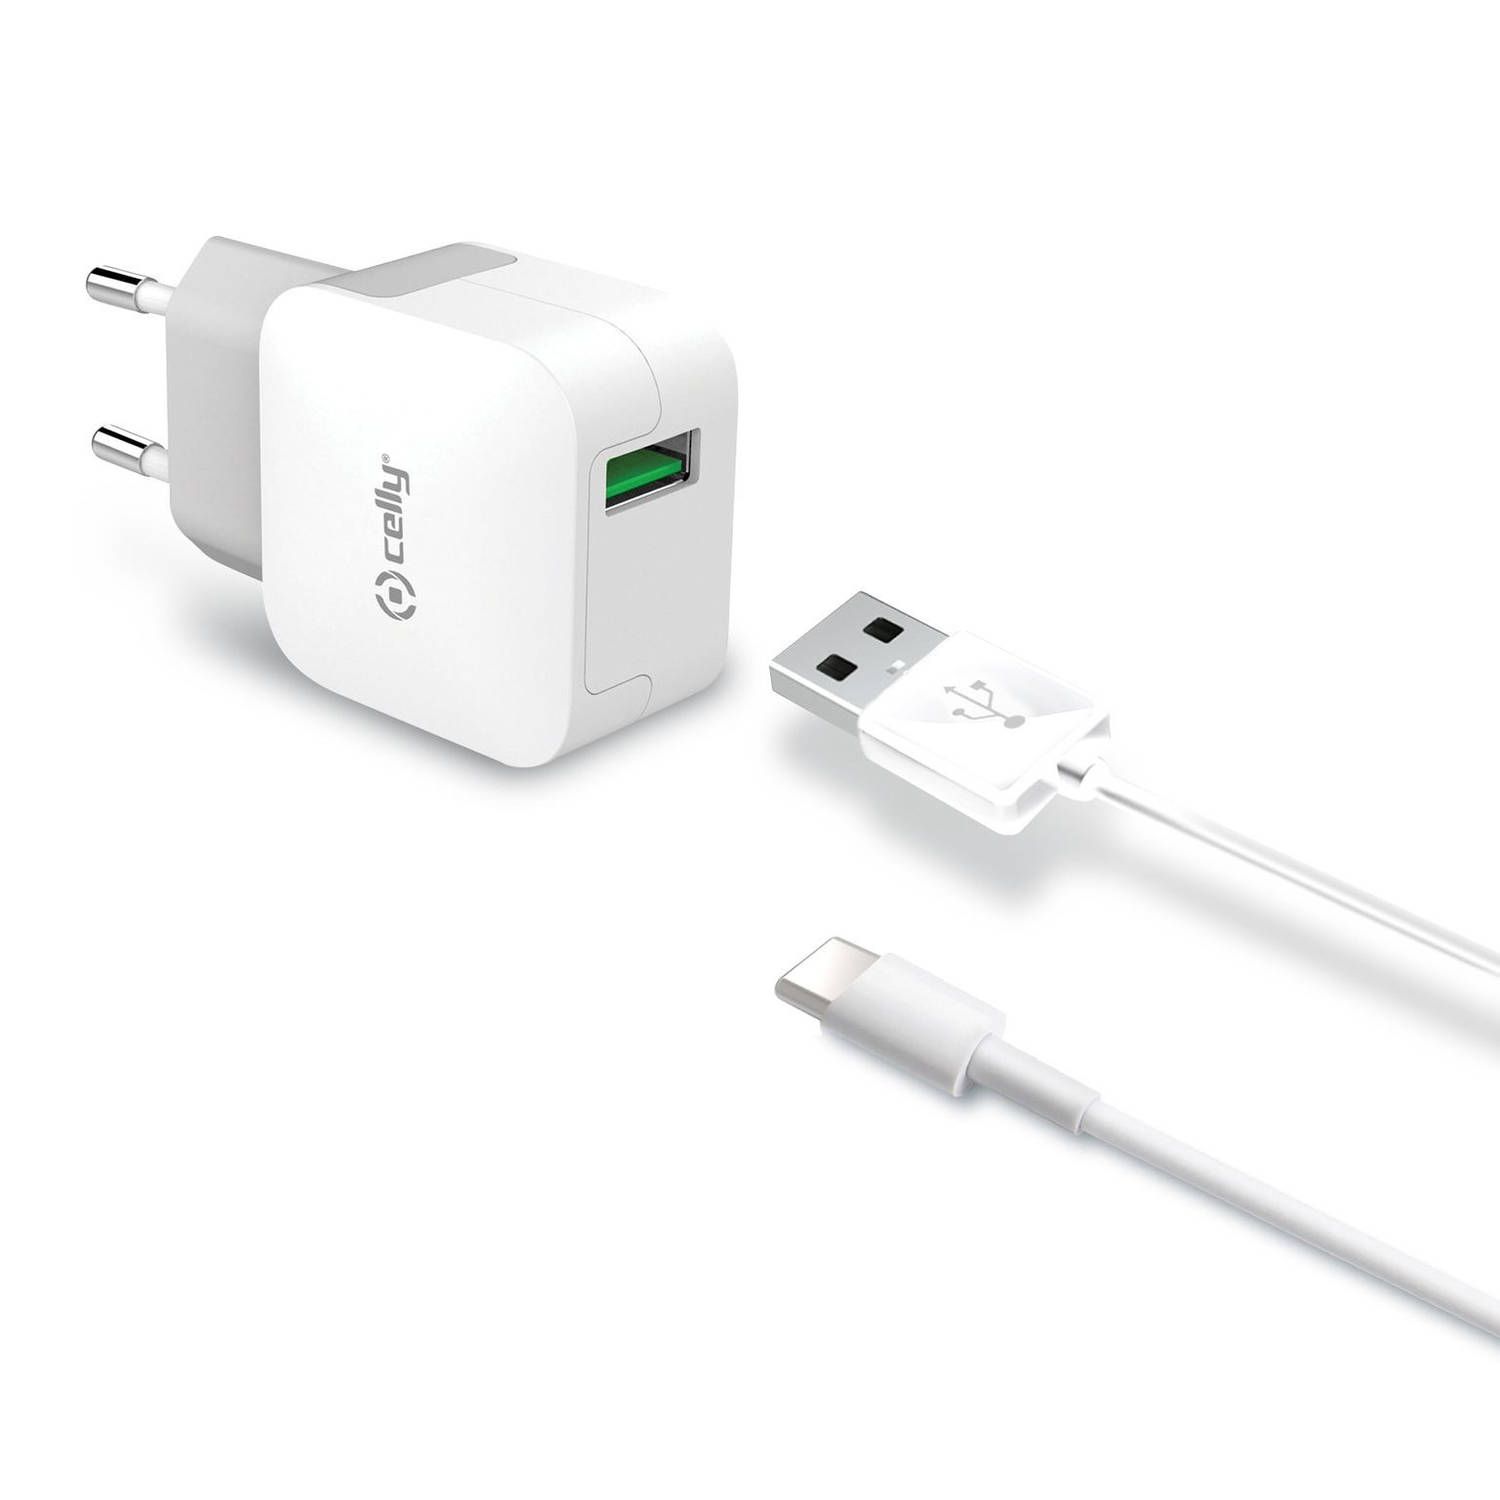 Celly - Turbo Lichtnetadapter met USB-C Kabel - Celly